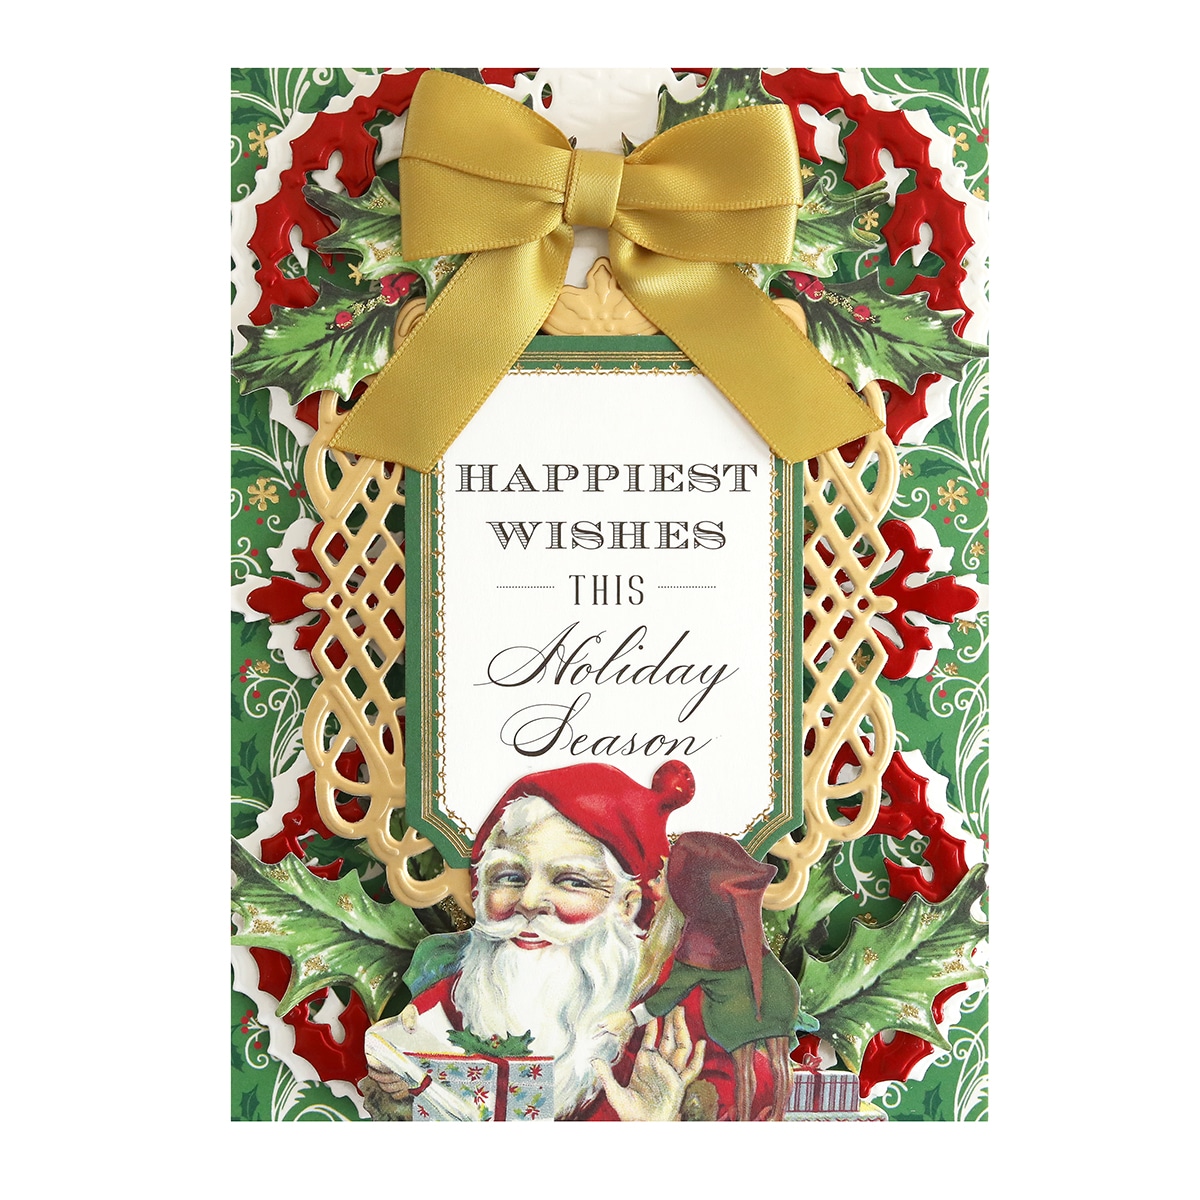 A christmas card with santa claus and a bow.